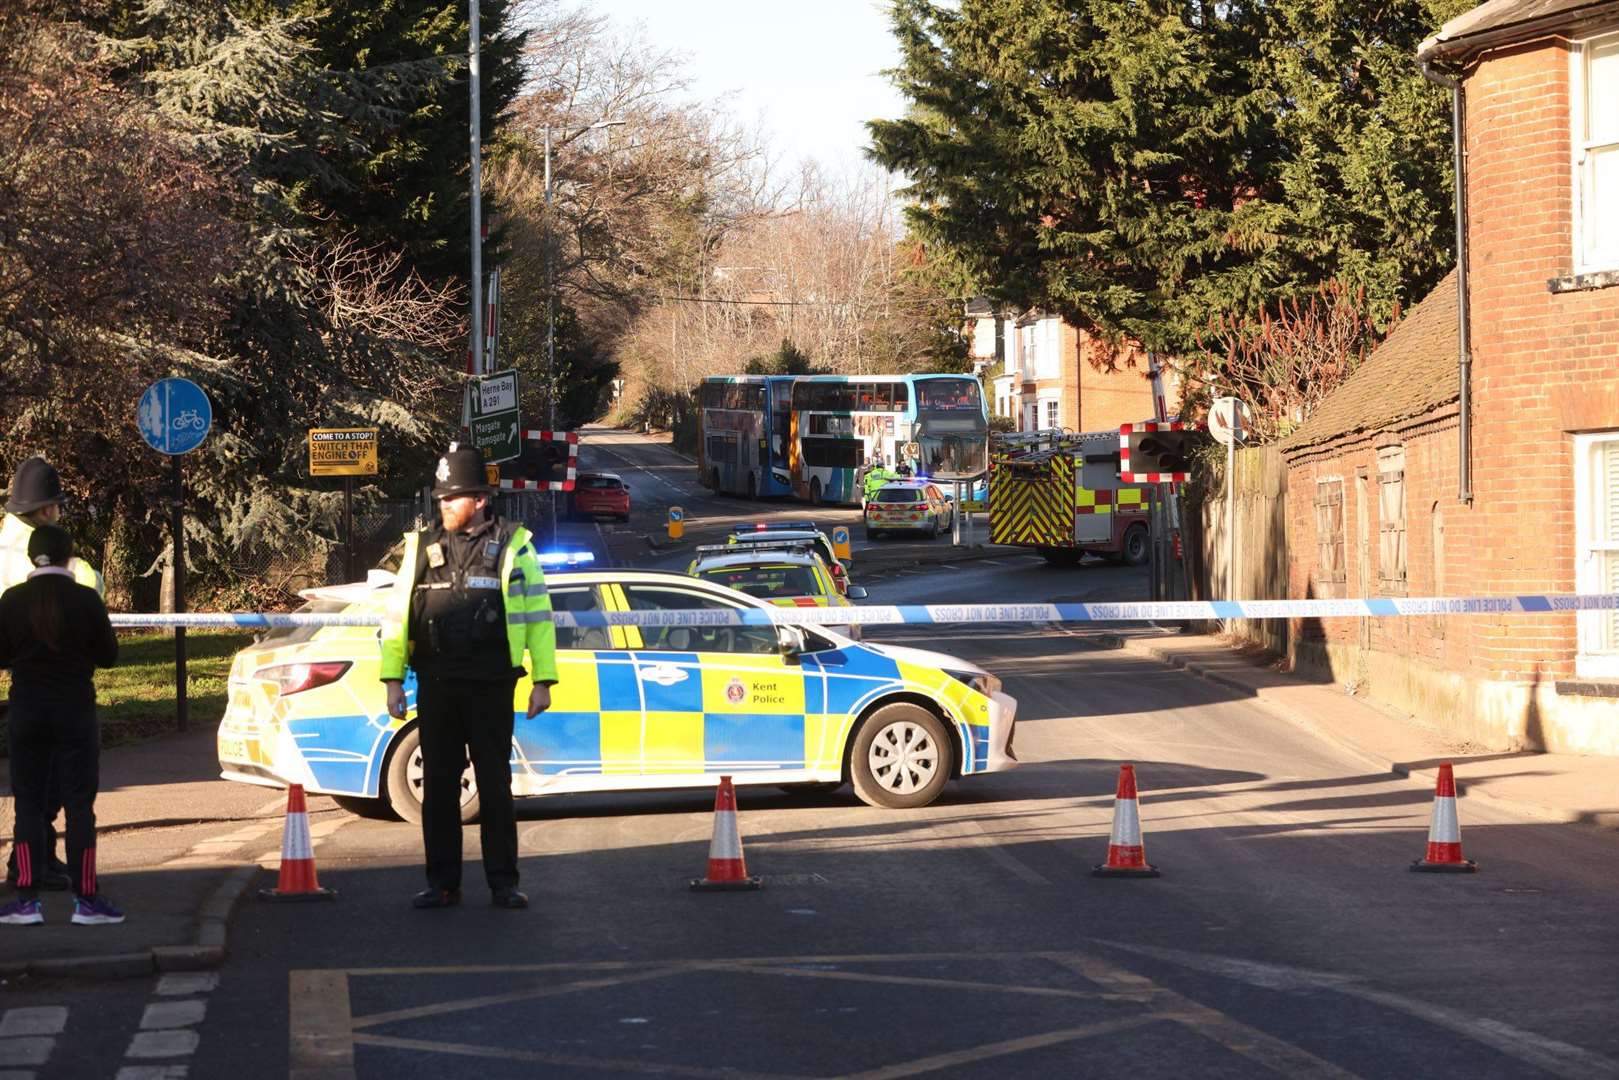 Police at the scene of the incident near Sturry level crossing in Canterbury. Picture: UKNIP